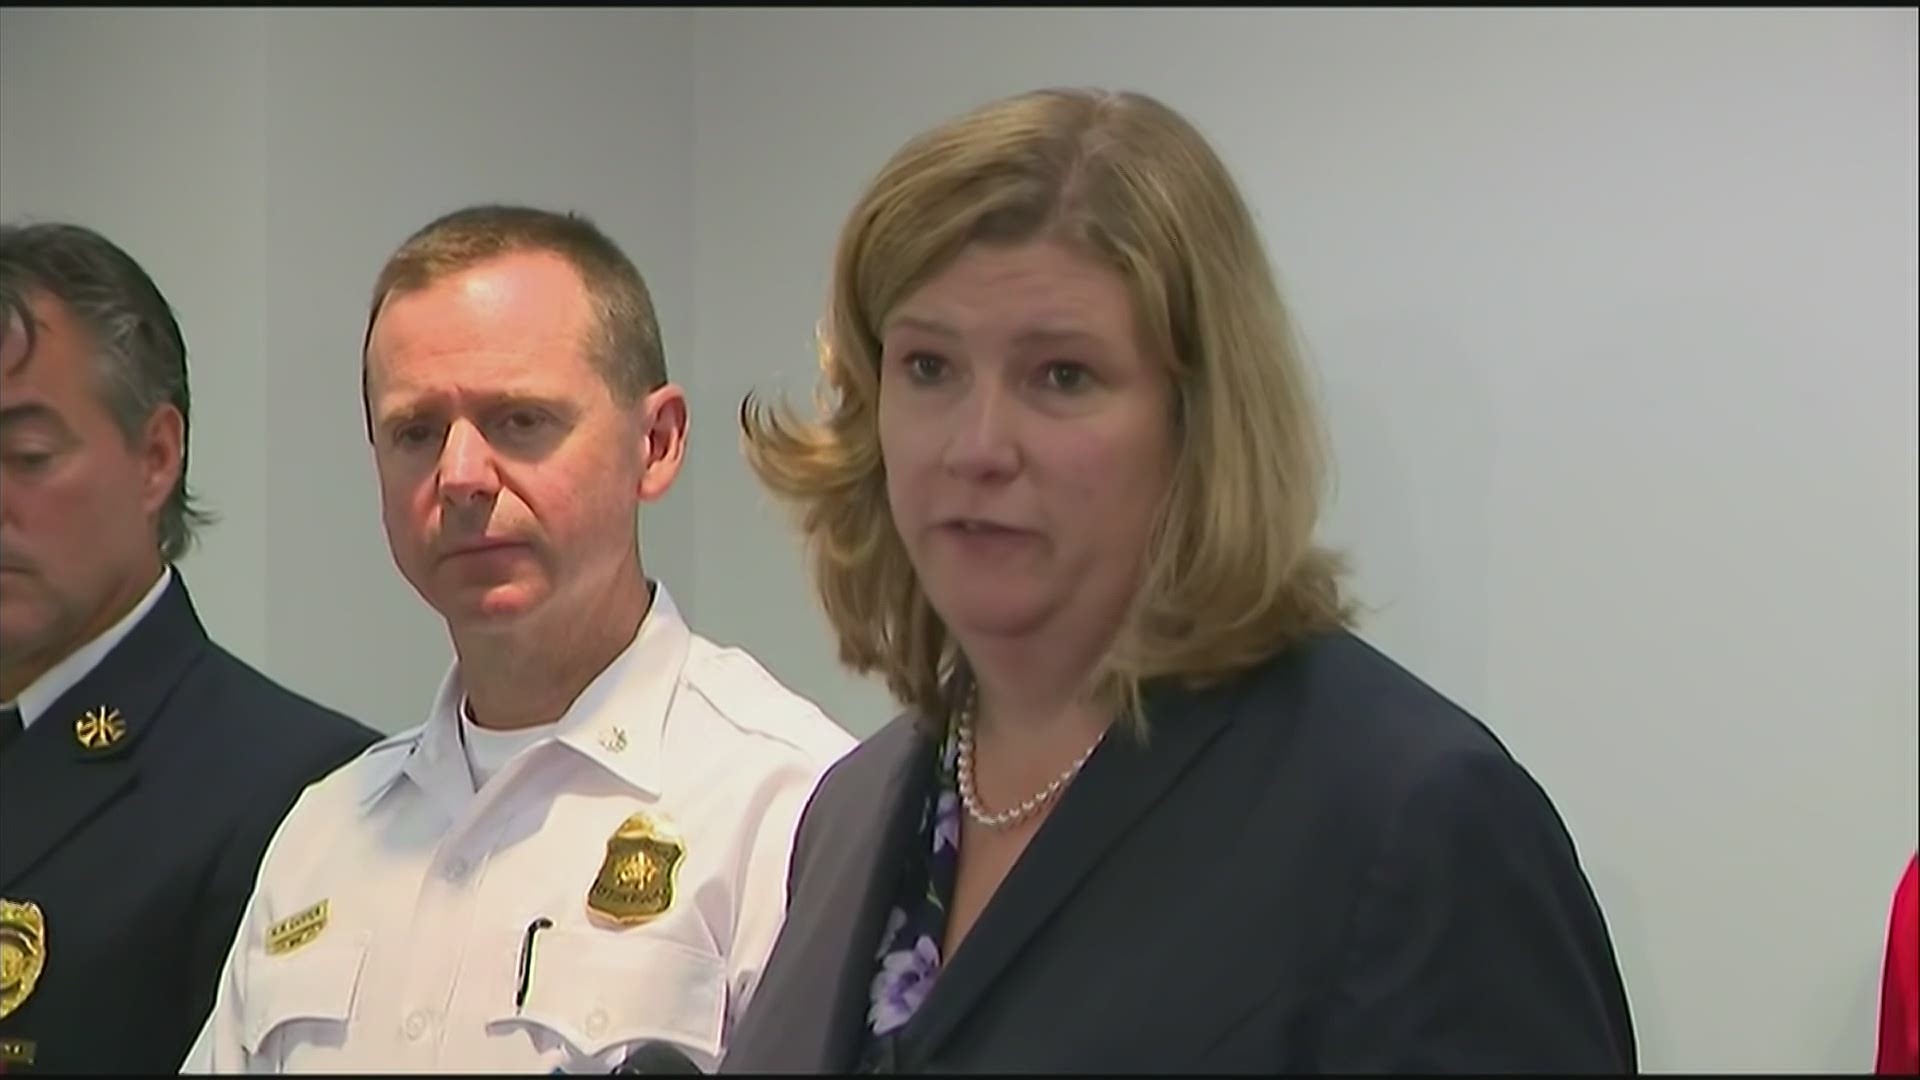 Mayor Nan Whaley said she was "so grateful for Dayton police's fast action", and that officers patrolling the area fired on the shooter within a minute, killing him.